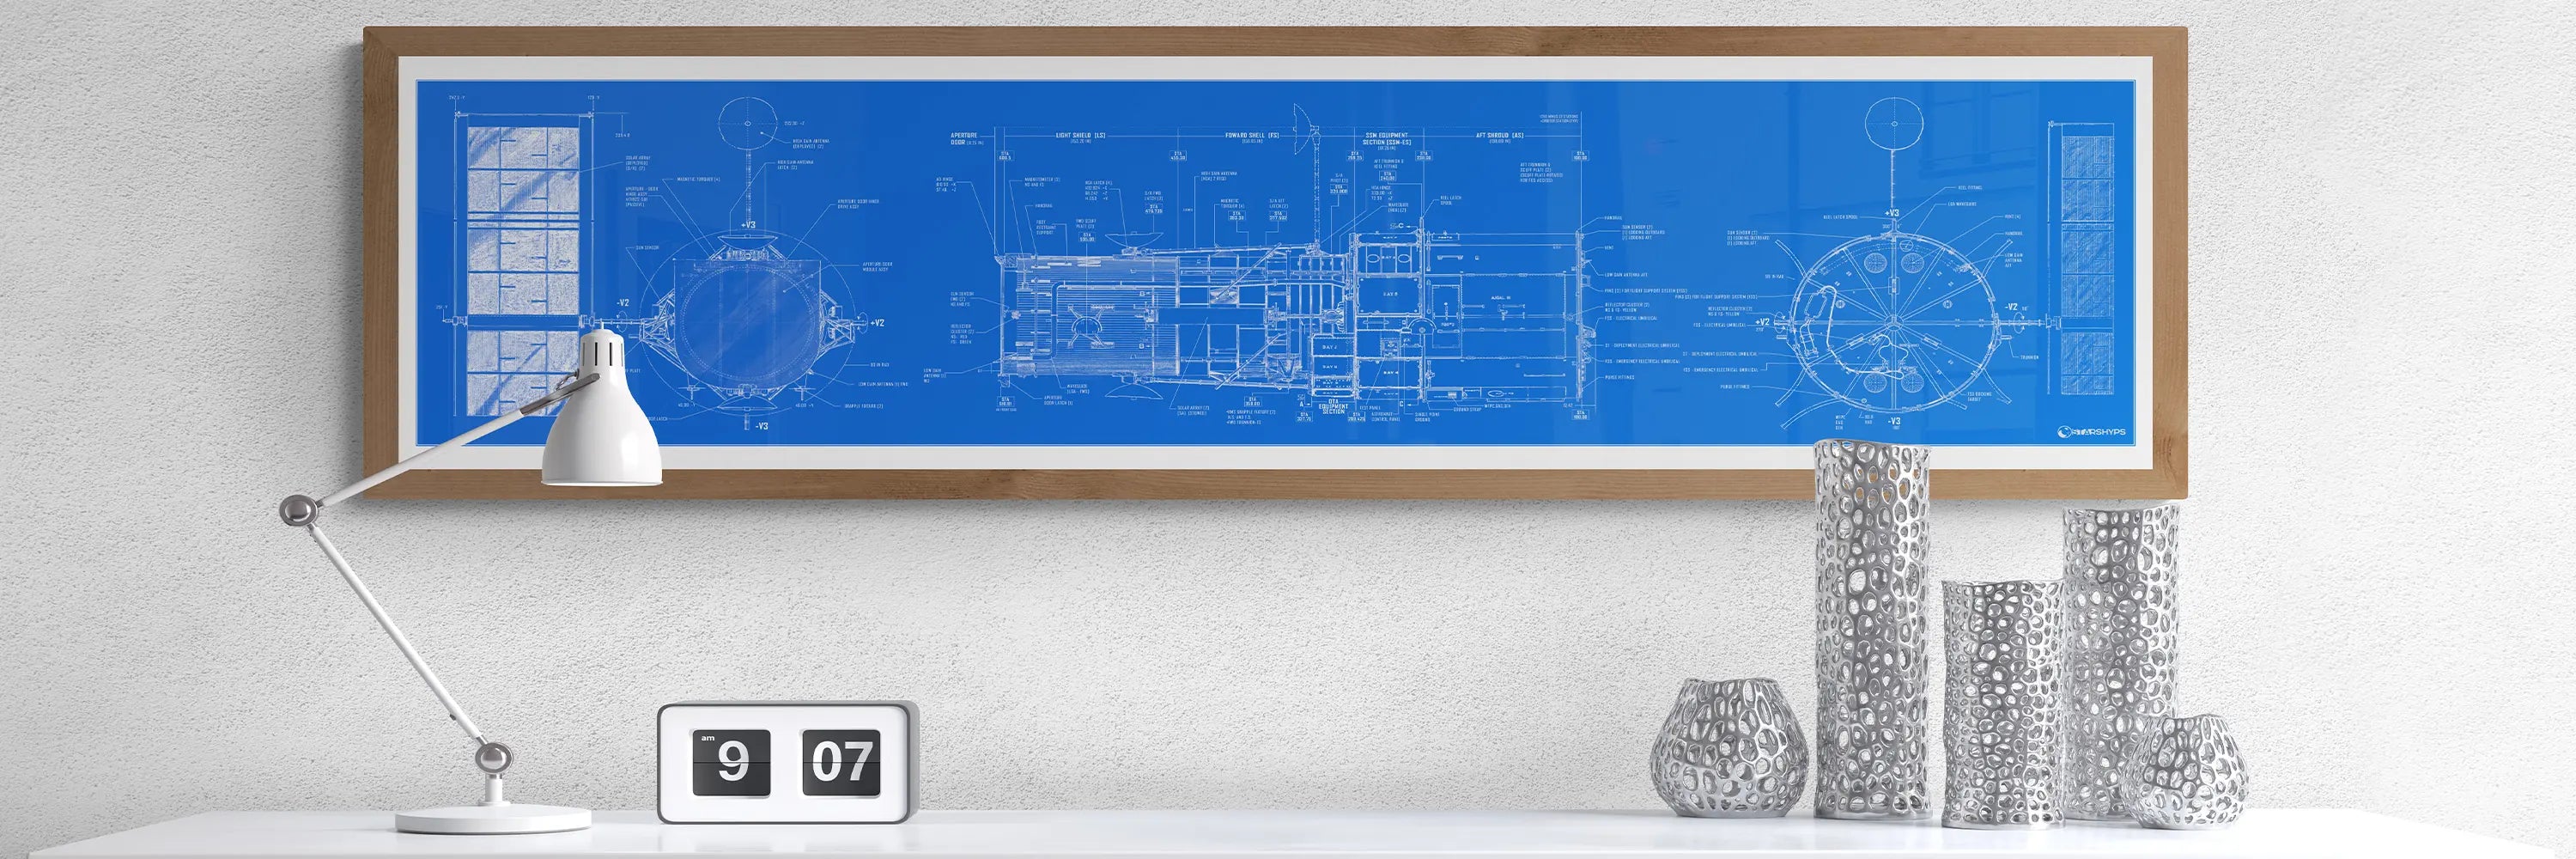 Hubble Space Telescope Blueprint | Rocket Blueprint Posters | The image shows a framed Hubble Space Telescope blueprint poster with intricate technical details, mounted on a light wall. Below, a white desk features a sleek white lamp, a flip clock reading 9:07, and a set of silver vases.